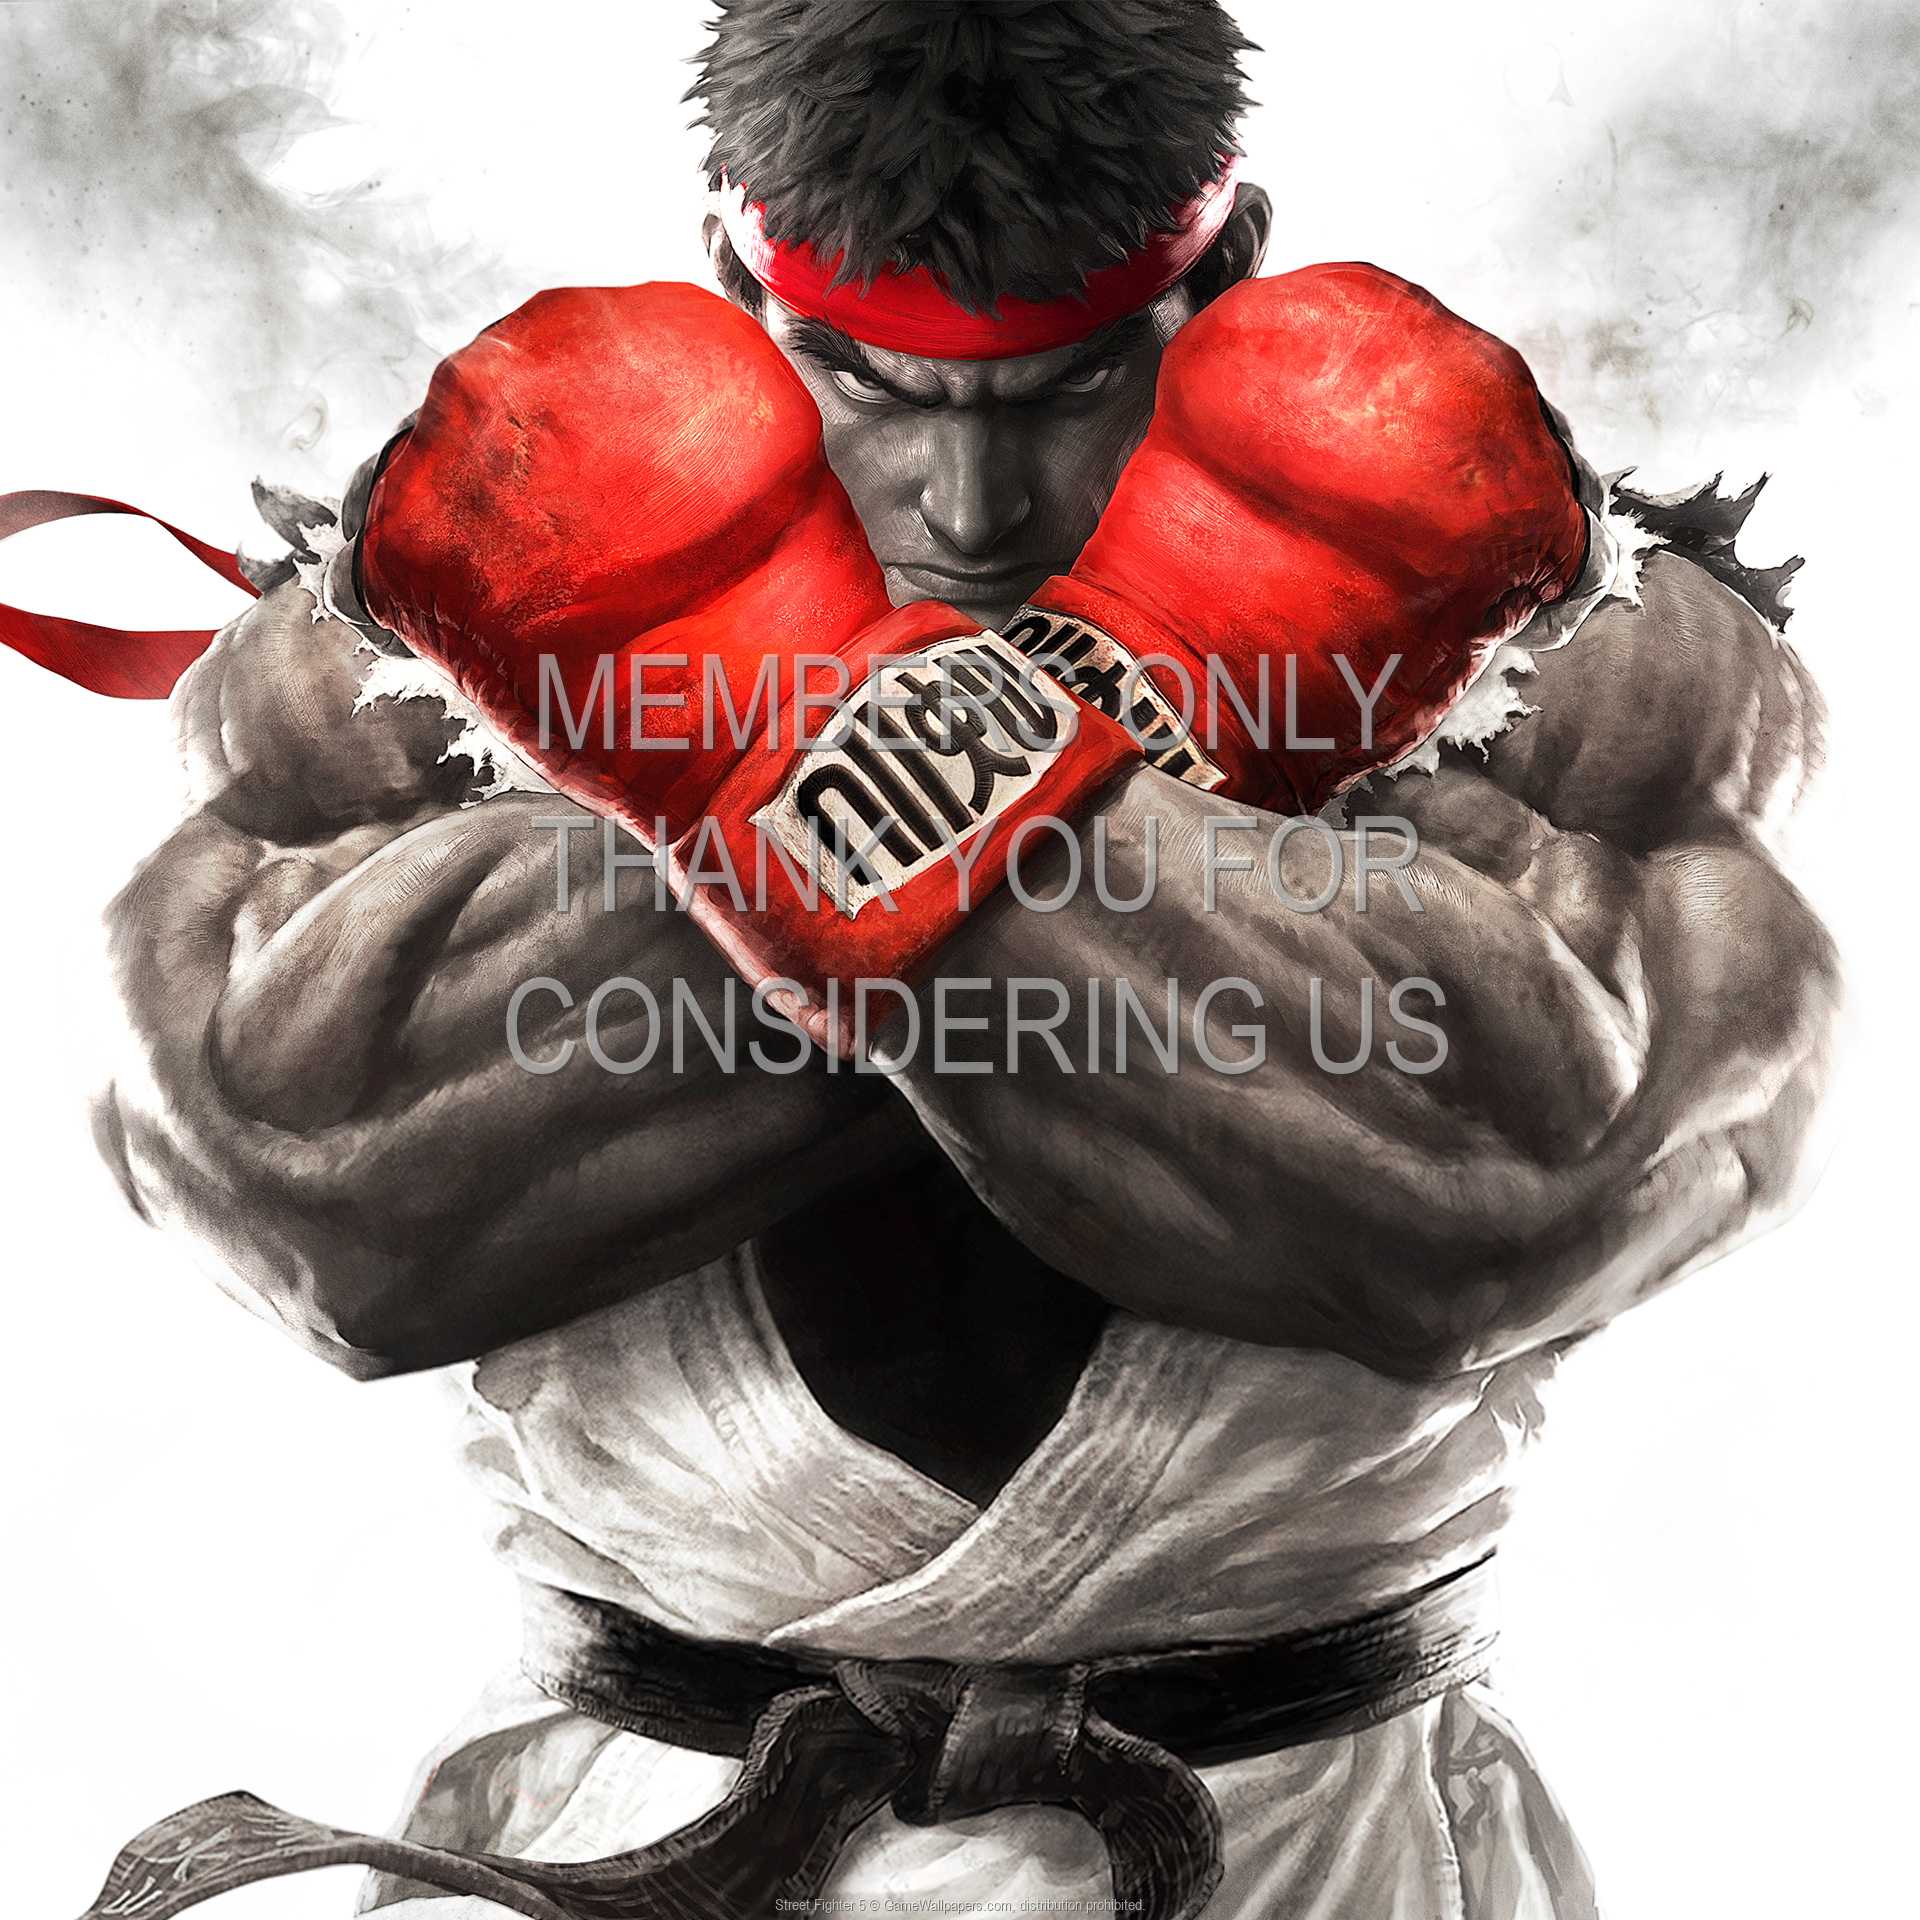 Street Fighter 5 1080p Horizontal Mobile wallpaper or background 01